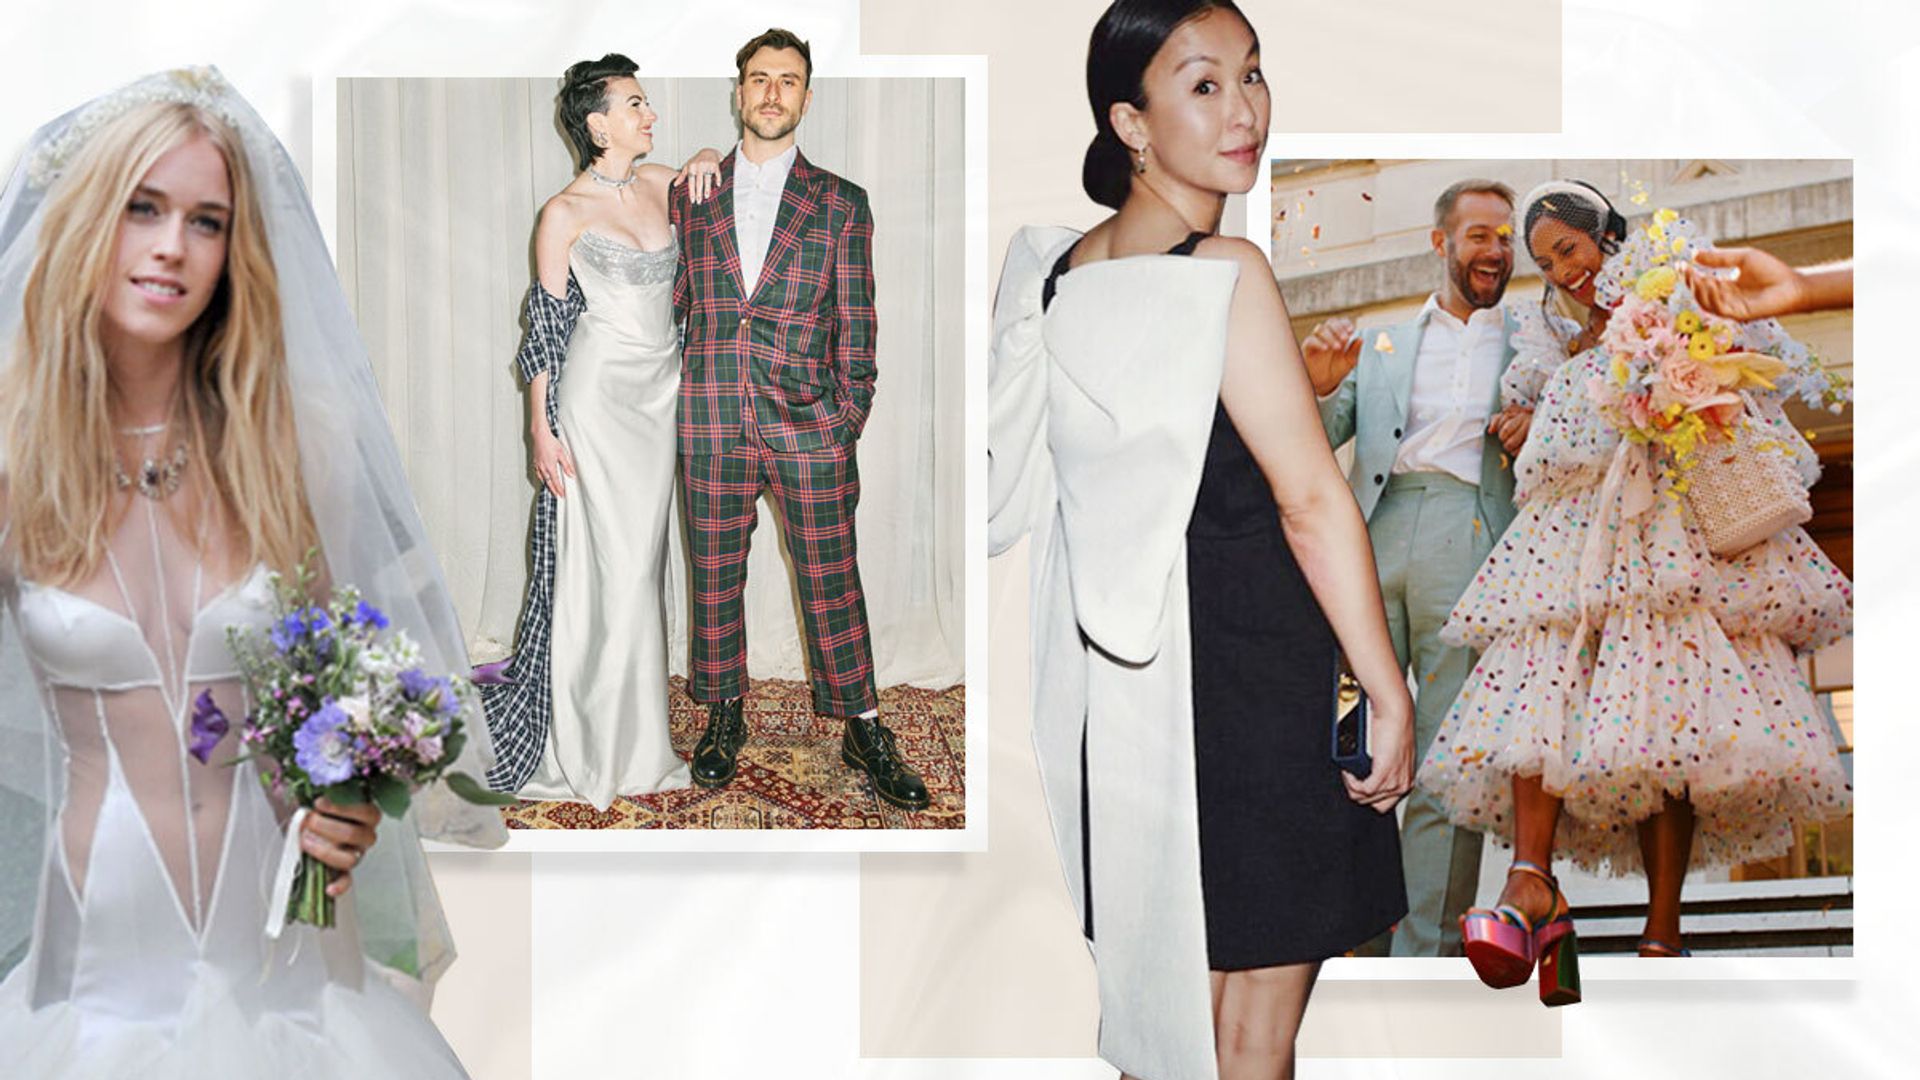 4 Alternative brides on why they chose their non-traditional dresses